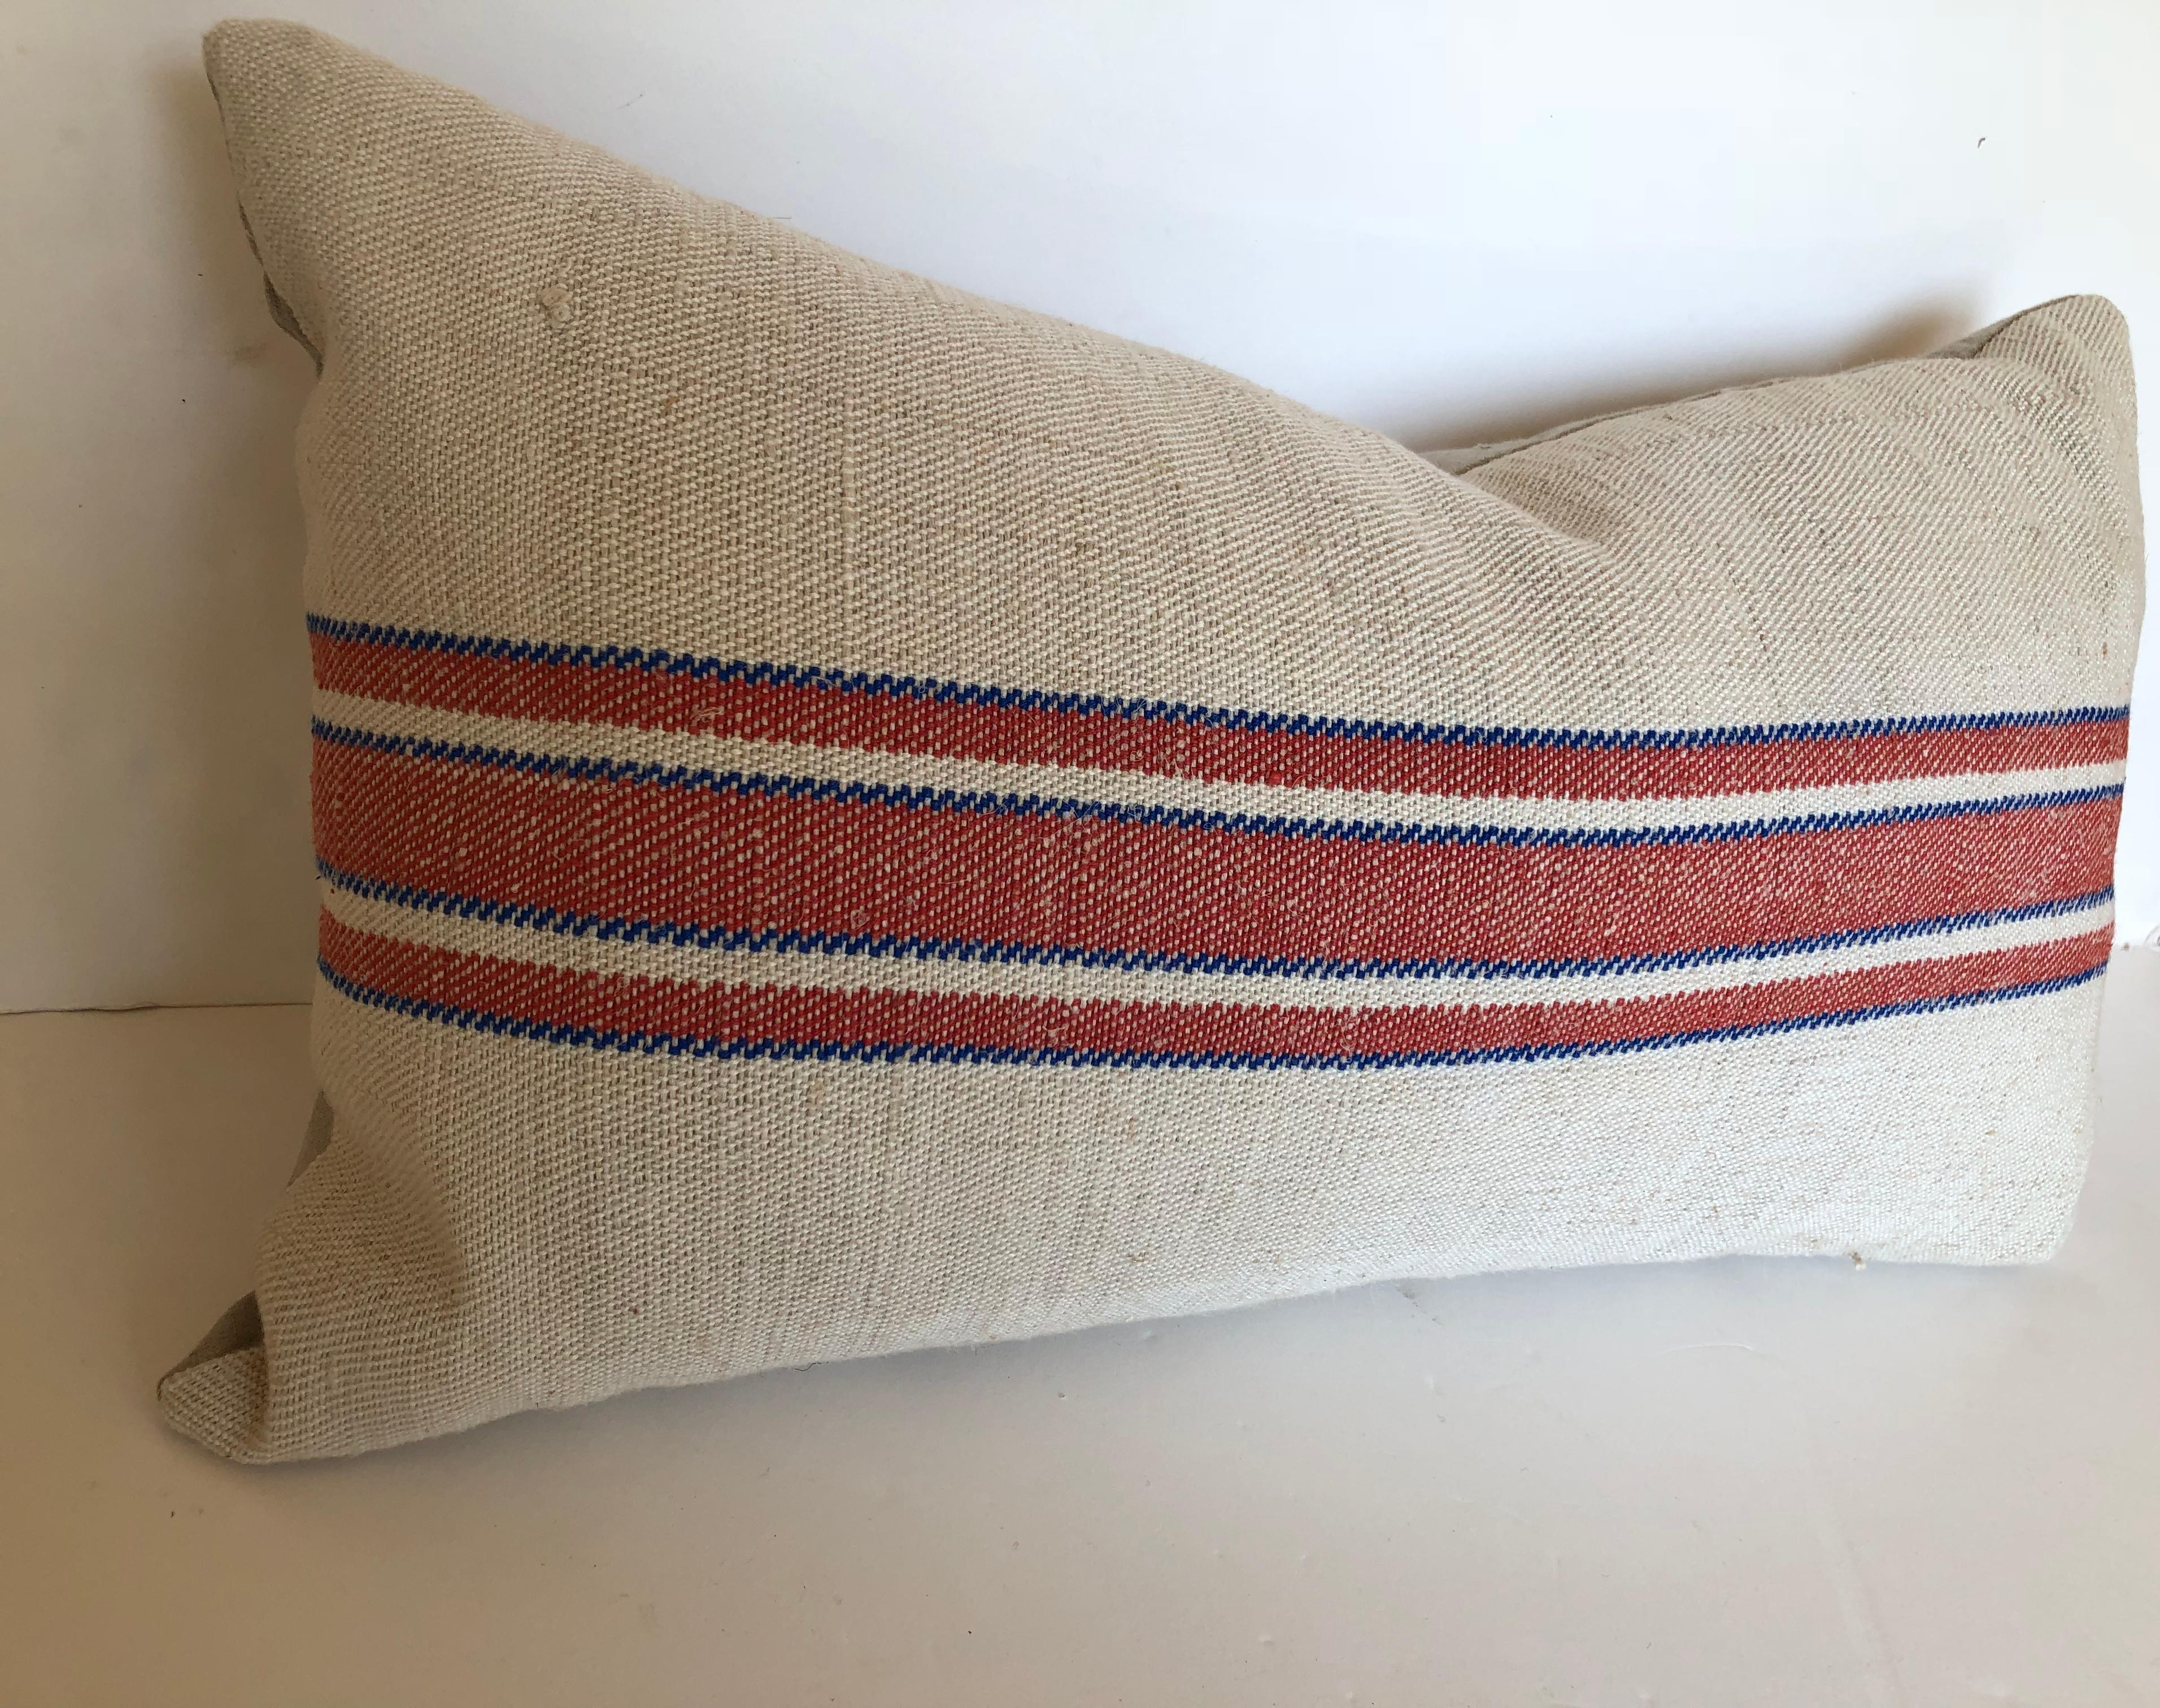 Custom Pillows Cut from a Vintage Handloomed Hemp and Linen German Grainsack In Good Condition For Sale In Glen Ellyn, IL